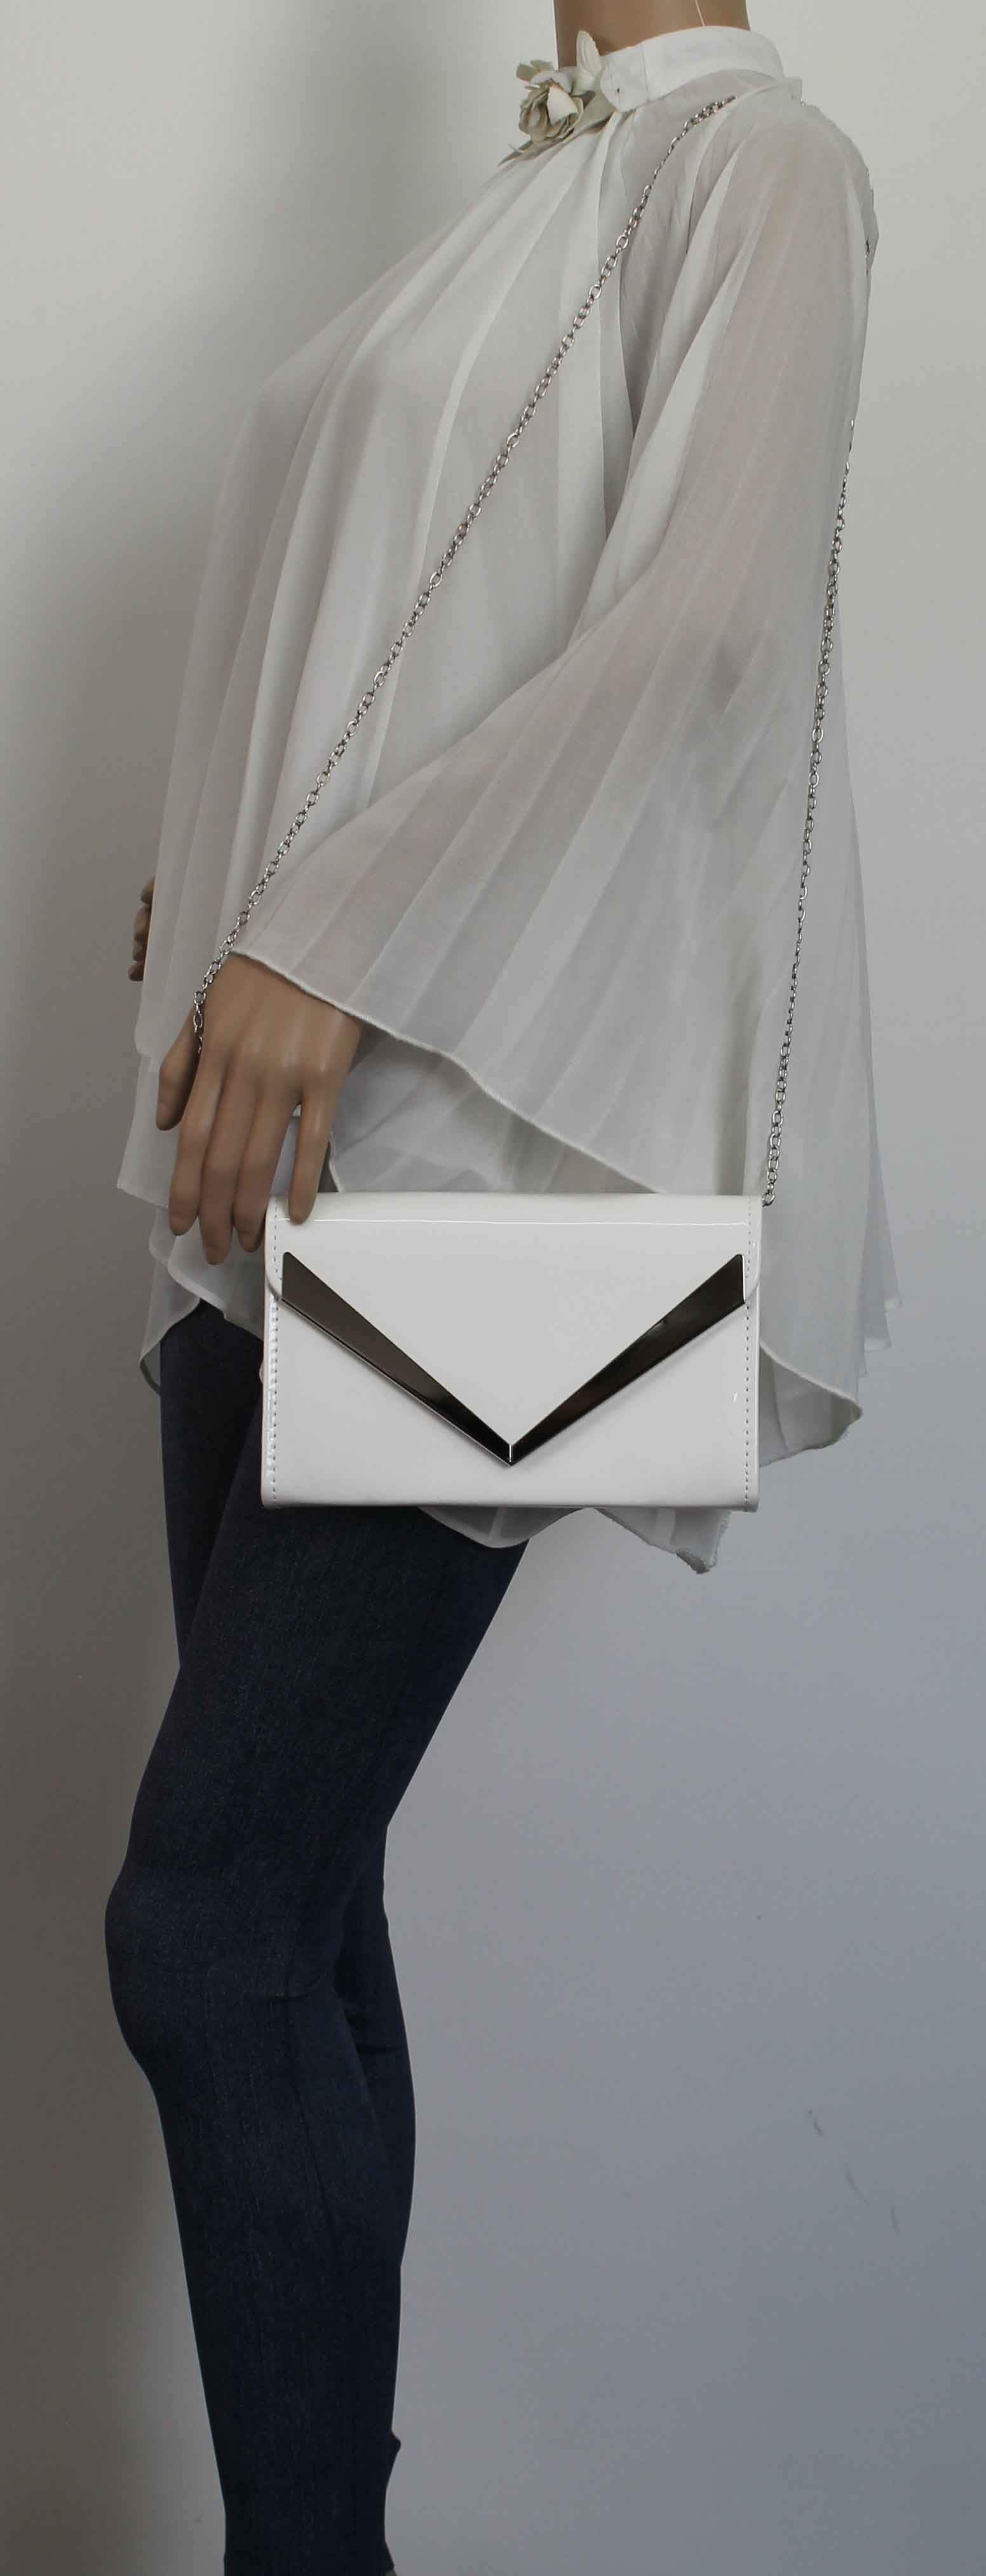 SWANKYSWANS Wendy V Patent Clutch Bag White Cute Cheap Clutch Bag For Weddings School and Work